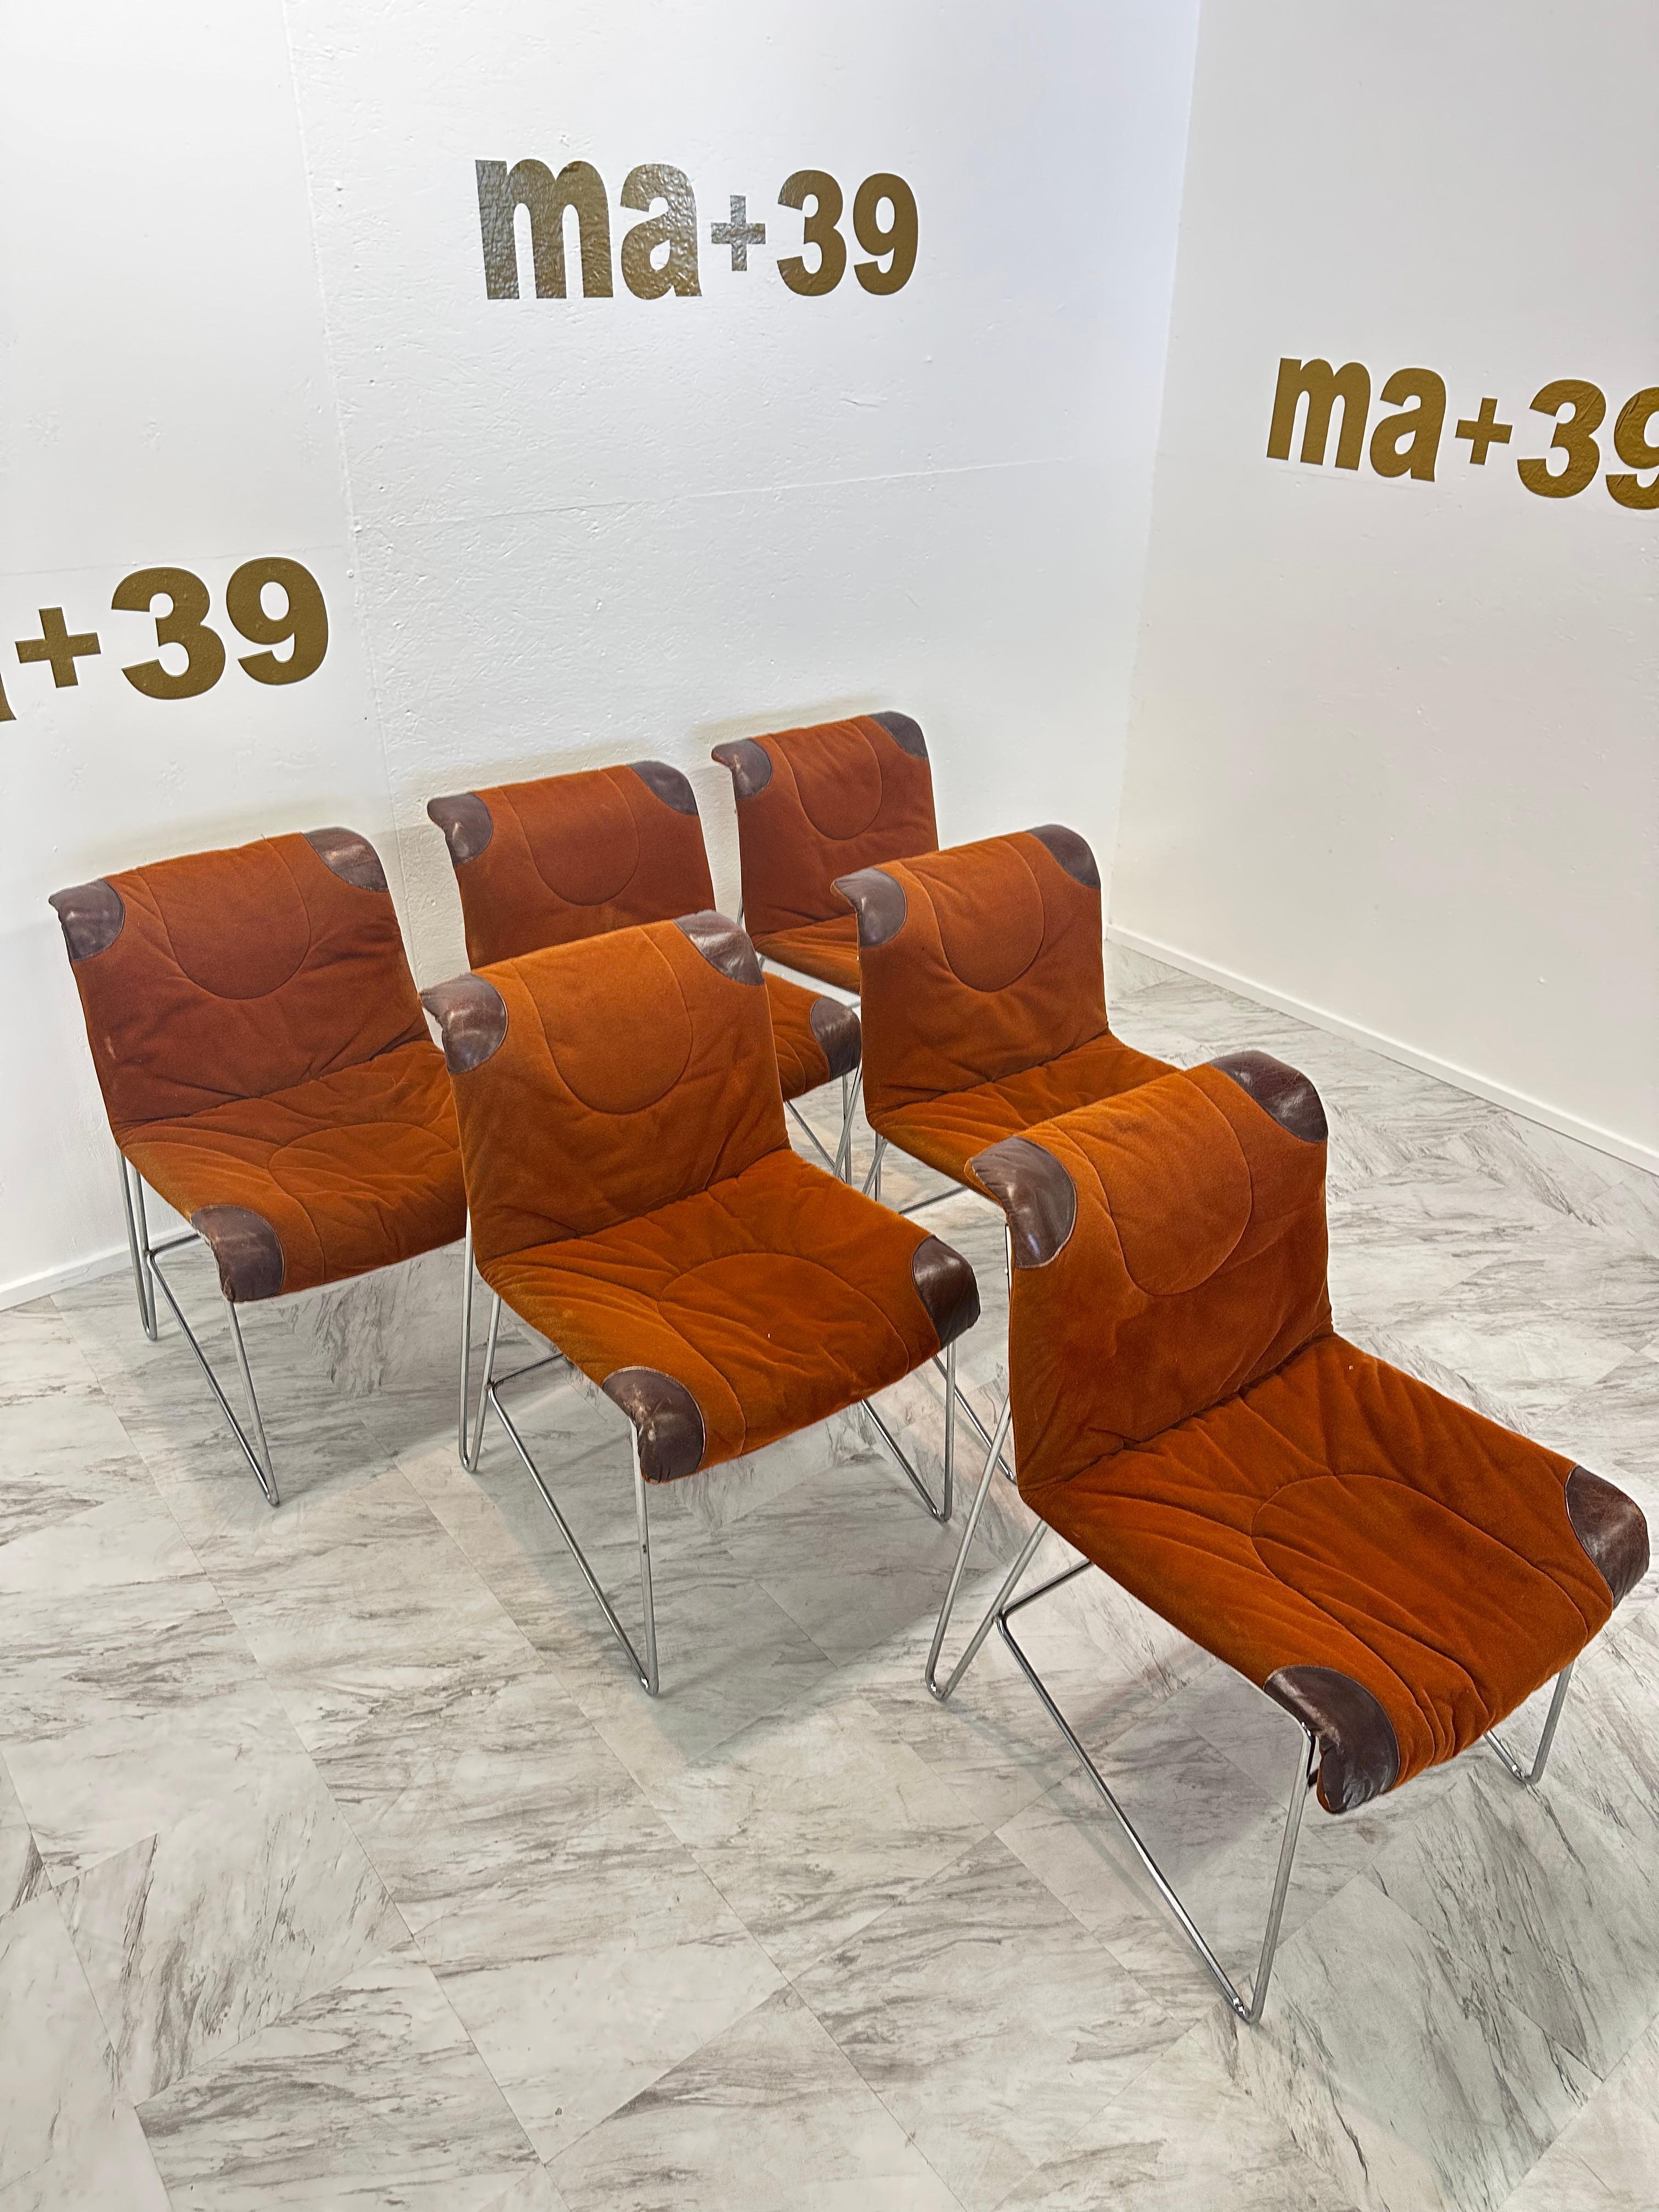 Late 20th Century Set of 6 Mid-Century Modern Italian Orange Chairs by Guido Faleschini 1970s For Sale